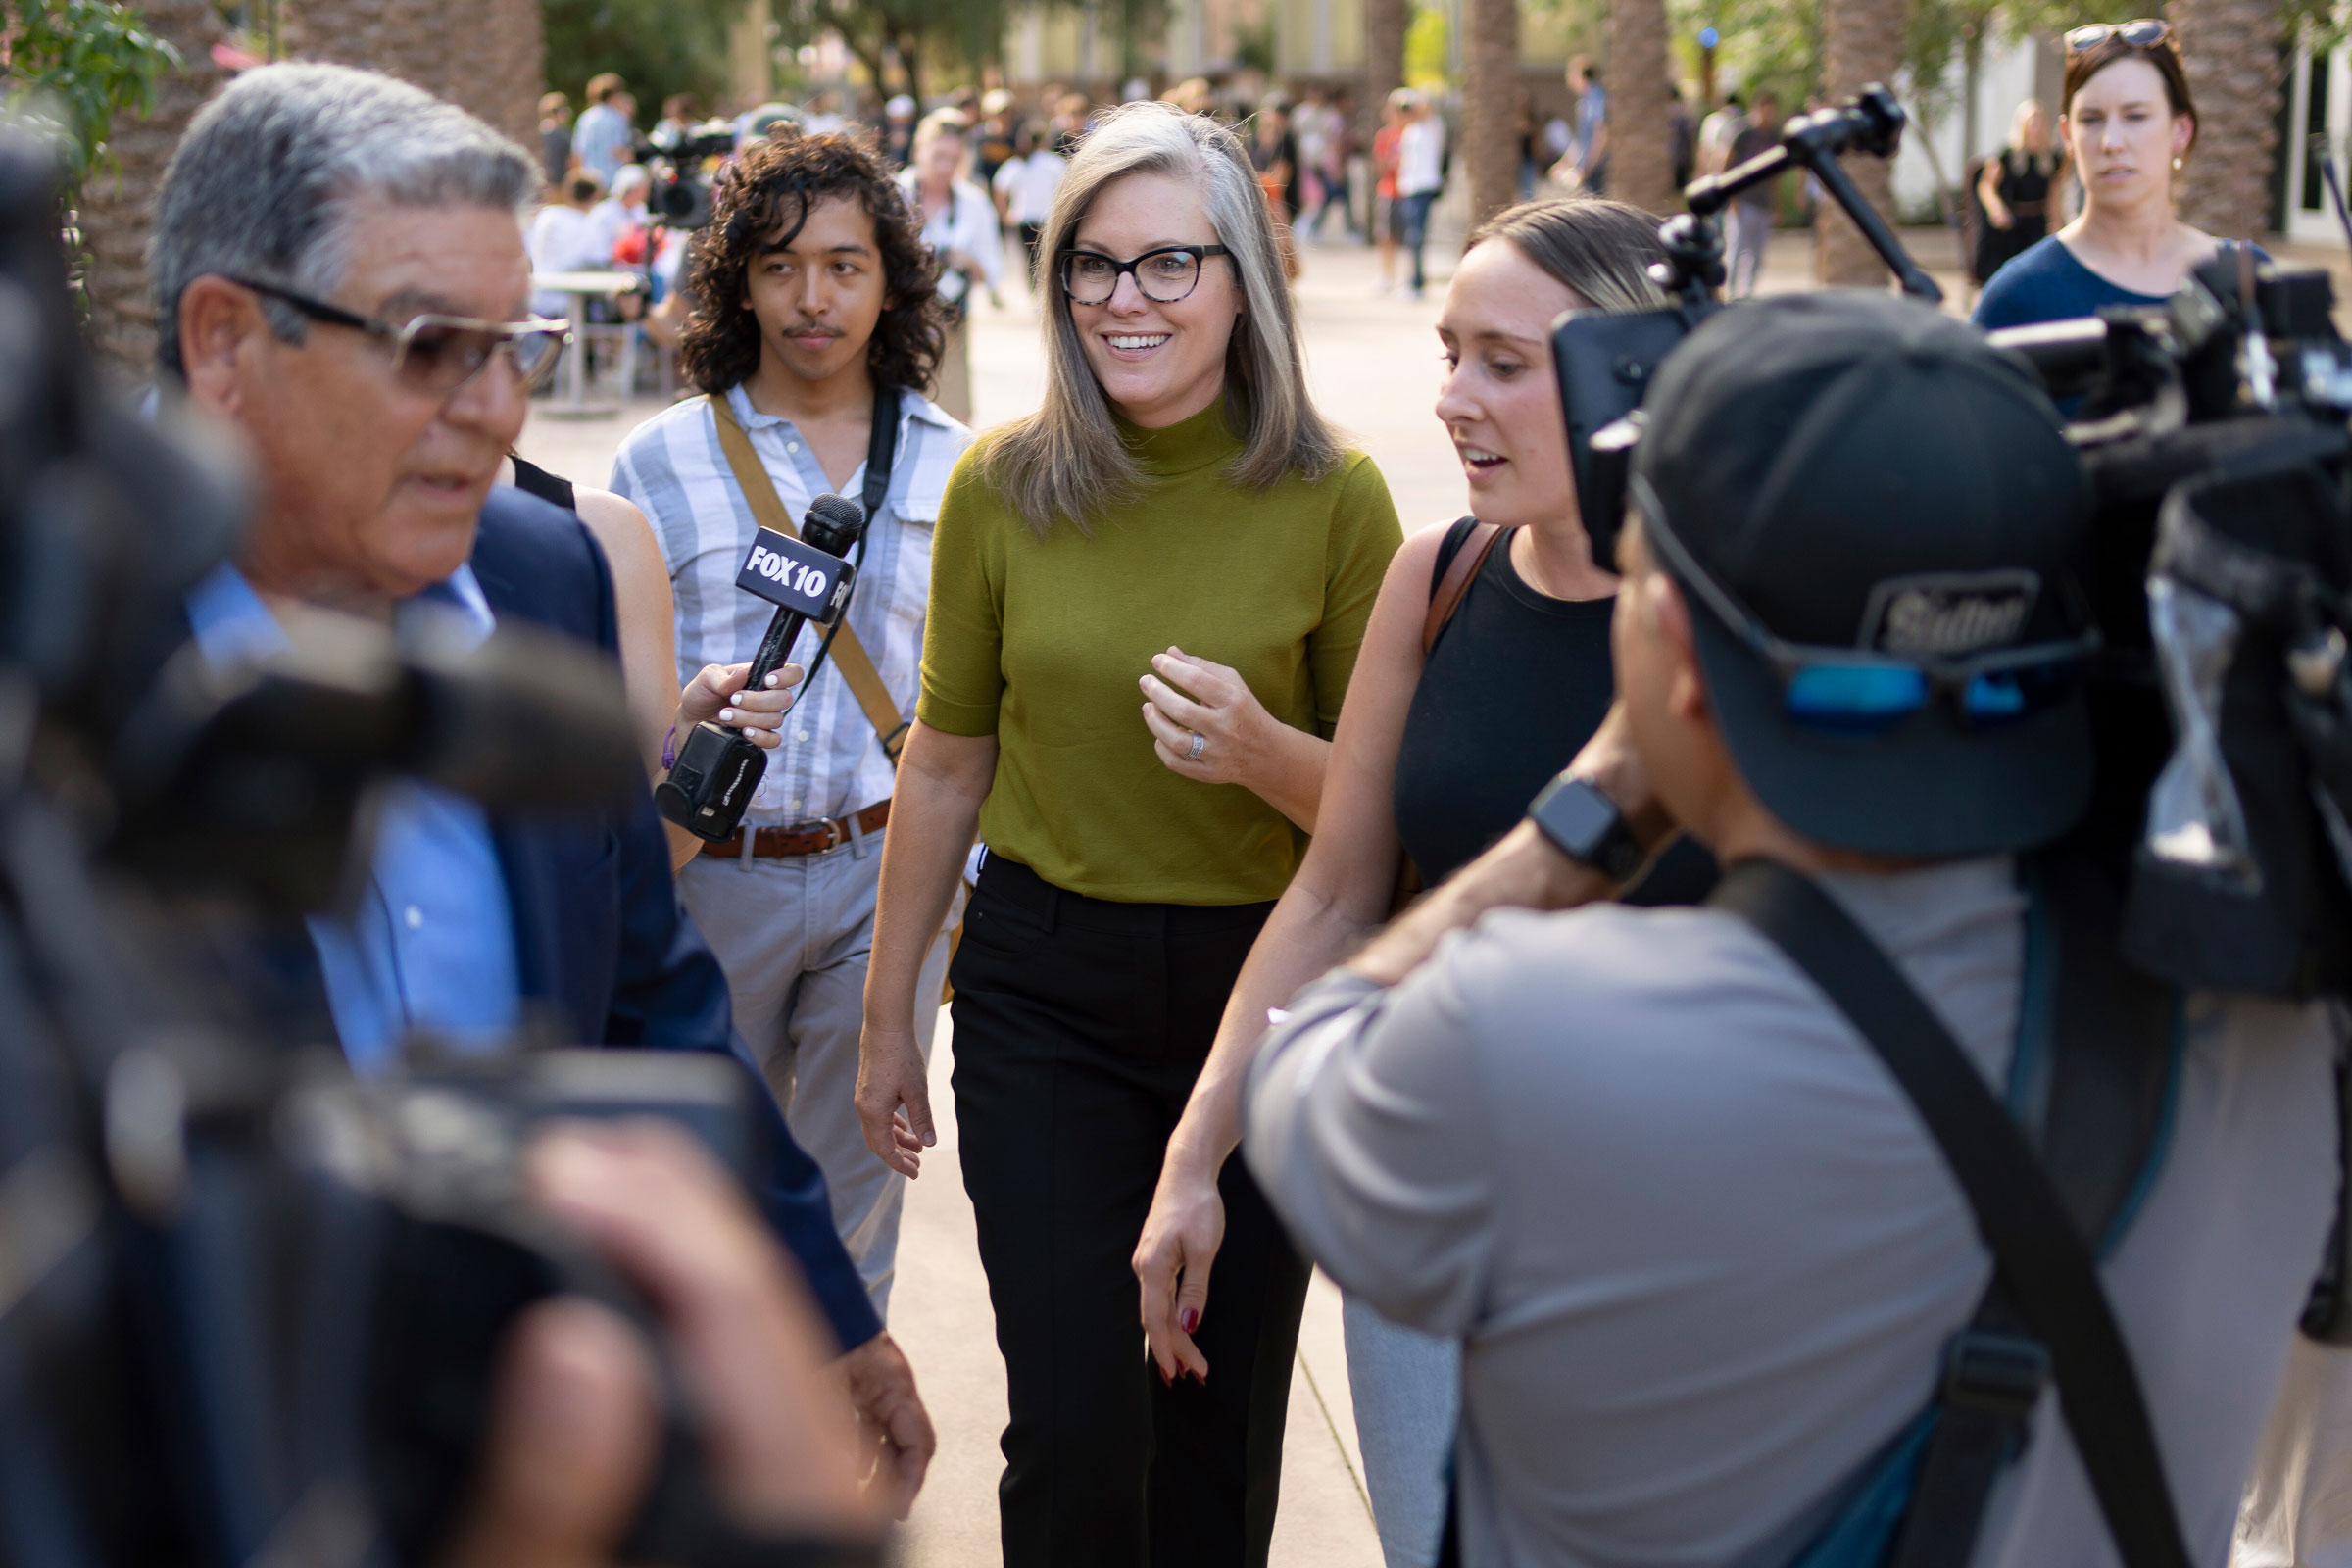 Katie Hobbs, the Democratic nominee for governor, at a National Voter Registration Day event at Arizona State University in Tempe, Ariz., Sept. 20, 2022. In the final weeks of a tight contest, critics say Hobbs has been too subdued. (Rebecca Noble—The New York Times/Redux)